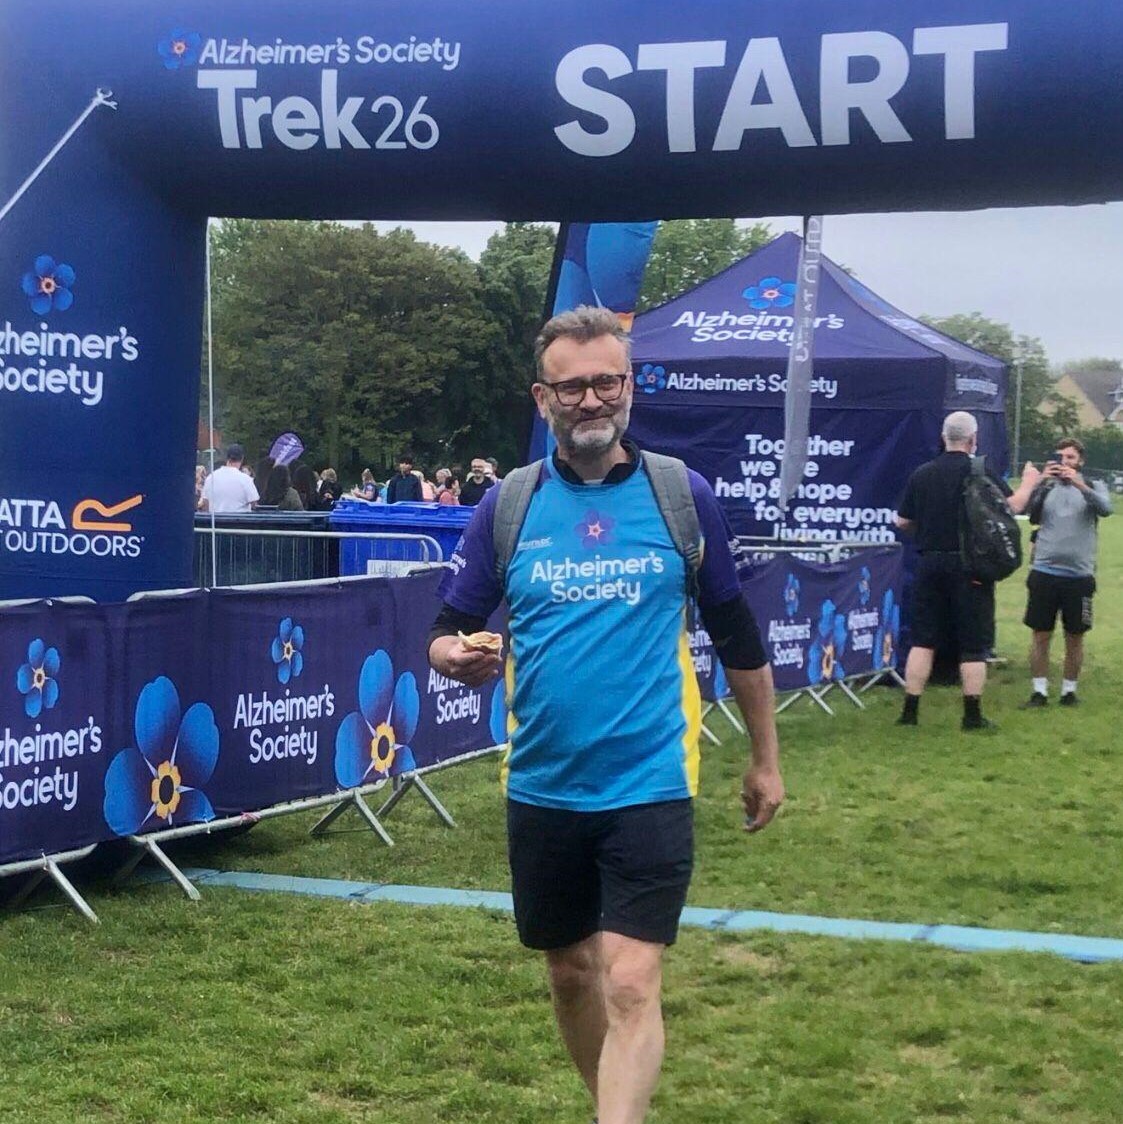 'I'm excited about today's Trek26 London. Seeing so many trekkers here this morning ready to trek miles for the same cause is very heart-warming. I'm wishing them all the very best of luck - we can do it! 💪

Good luck to Hugh Dennis and all our trekkers at #Trek26 London today!